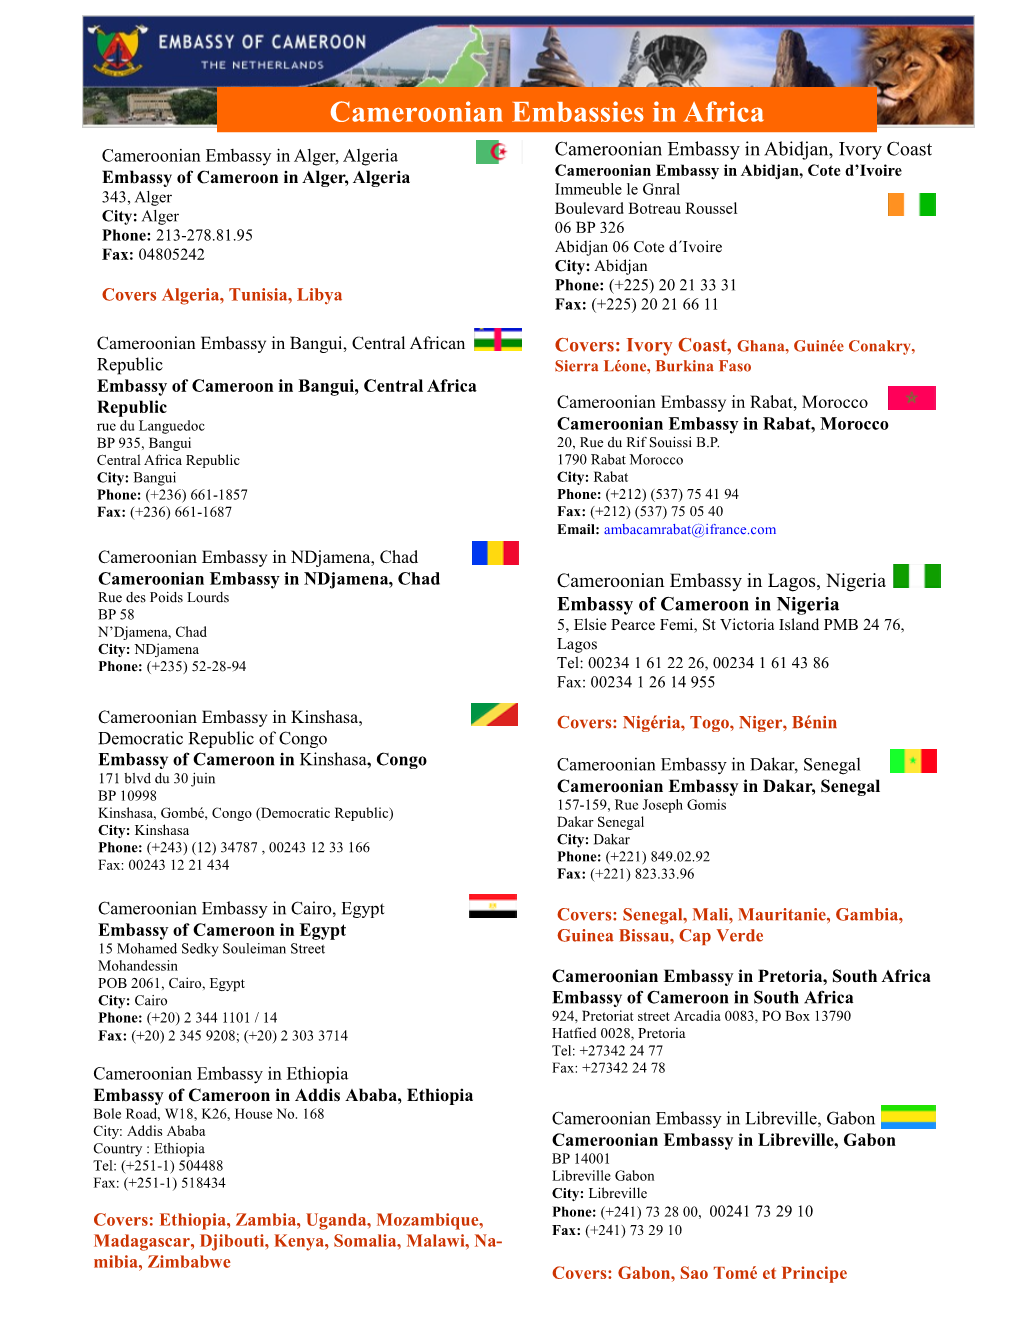 Cameroonian Embassies in Africa